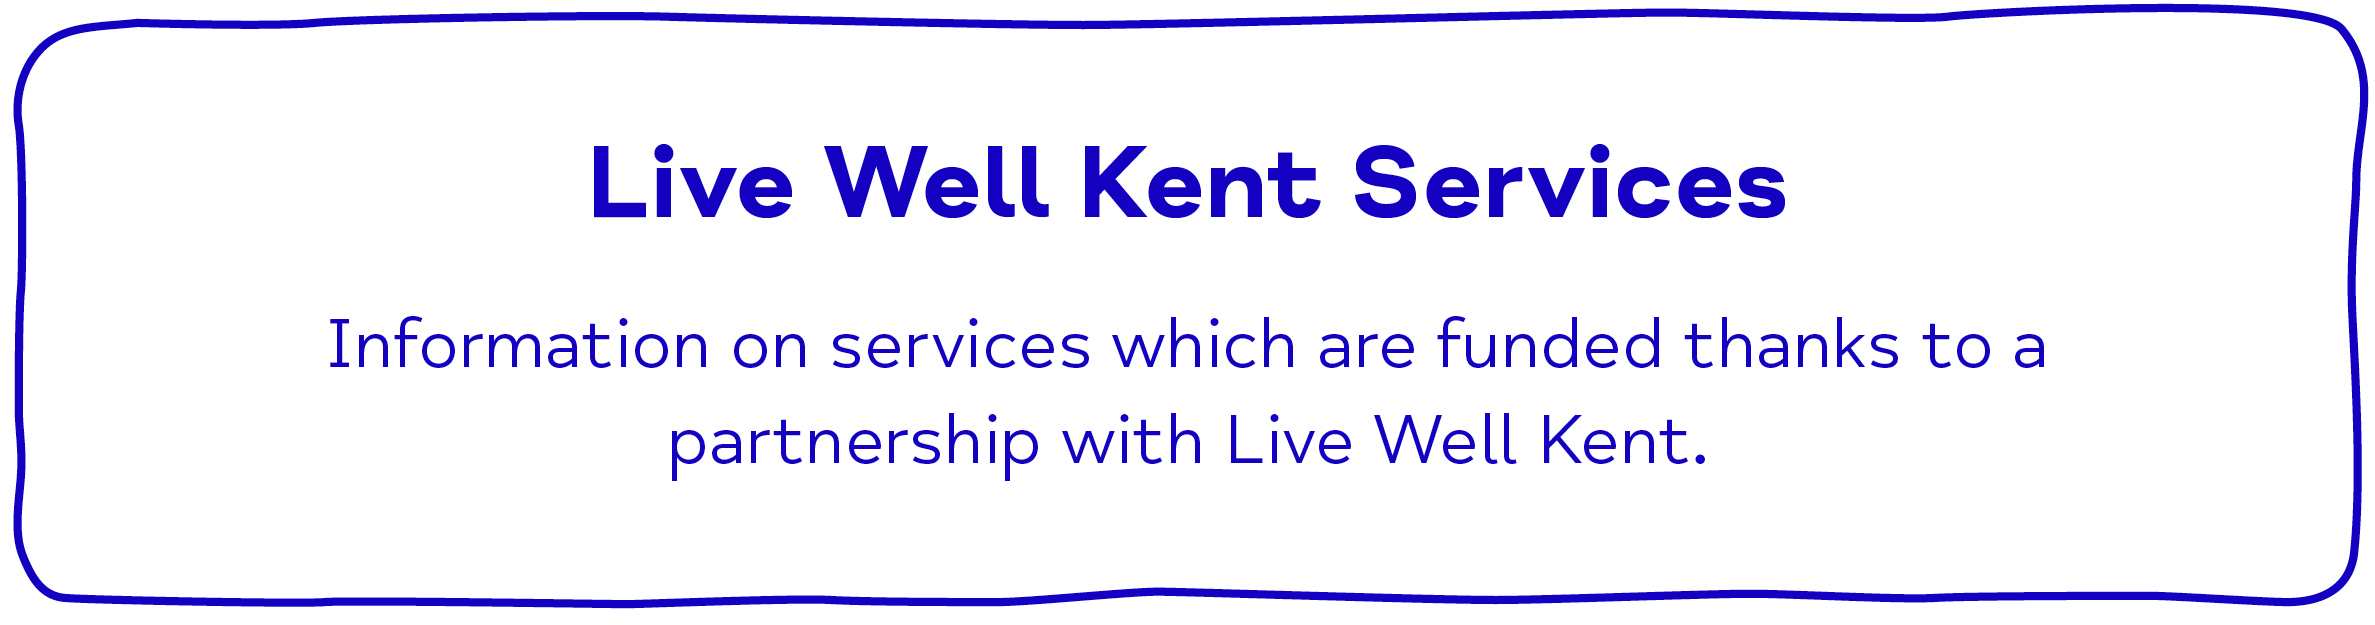 Live Well Kent Services Information on services which are funded thanks to a partnership with Live Well Kent.